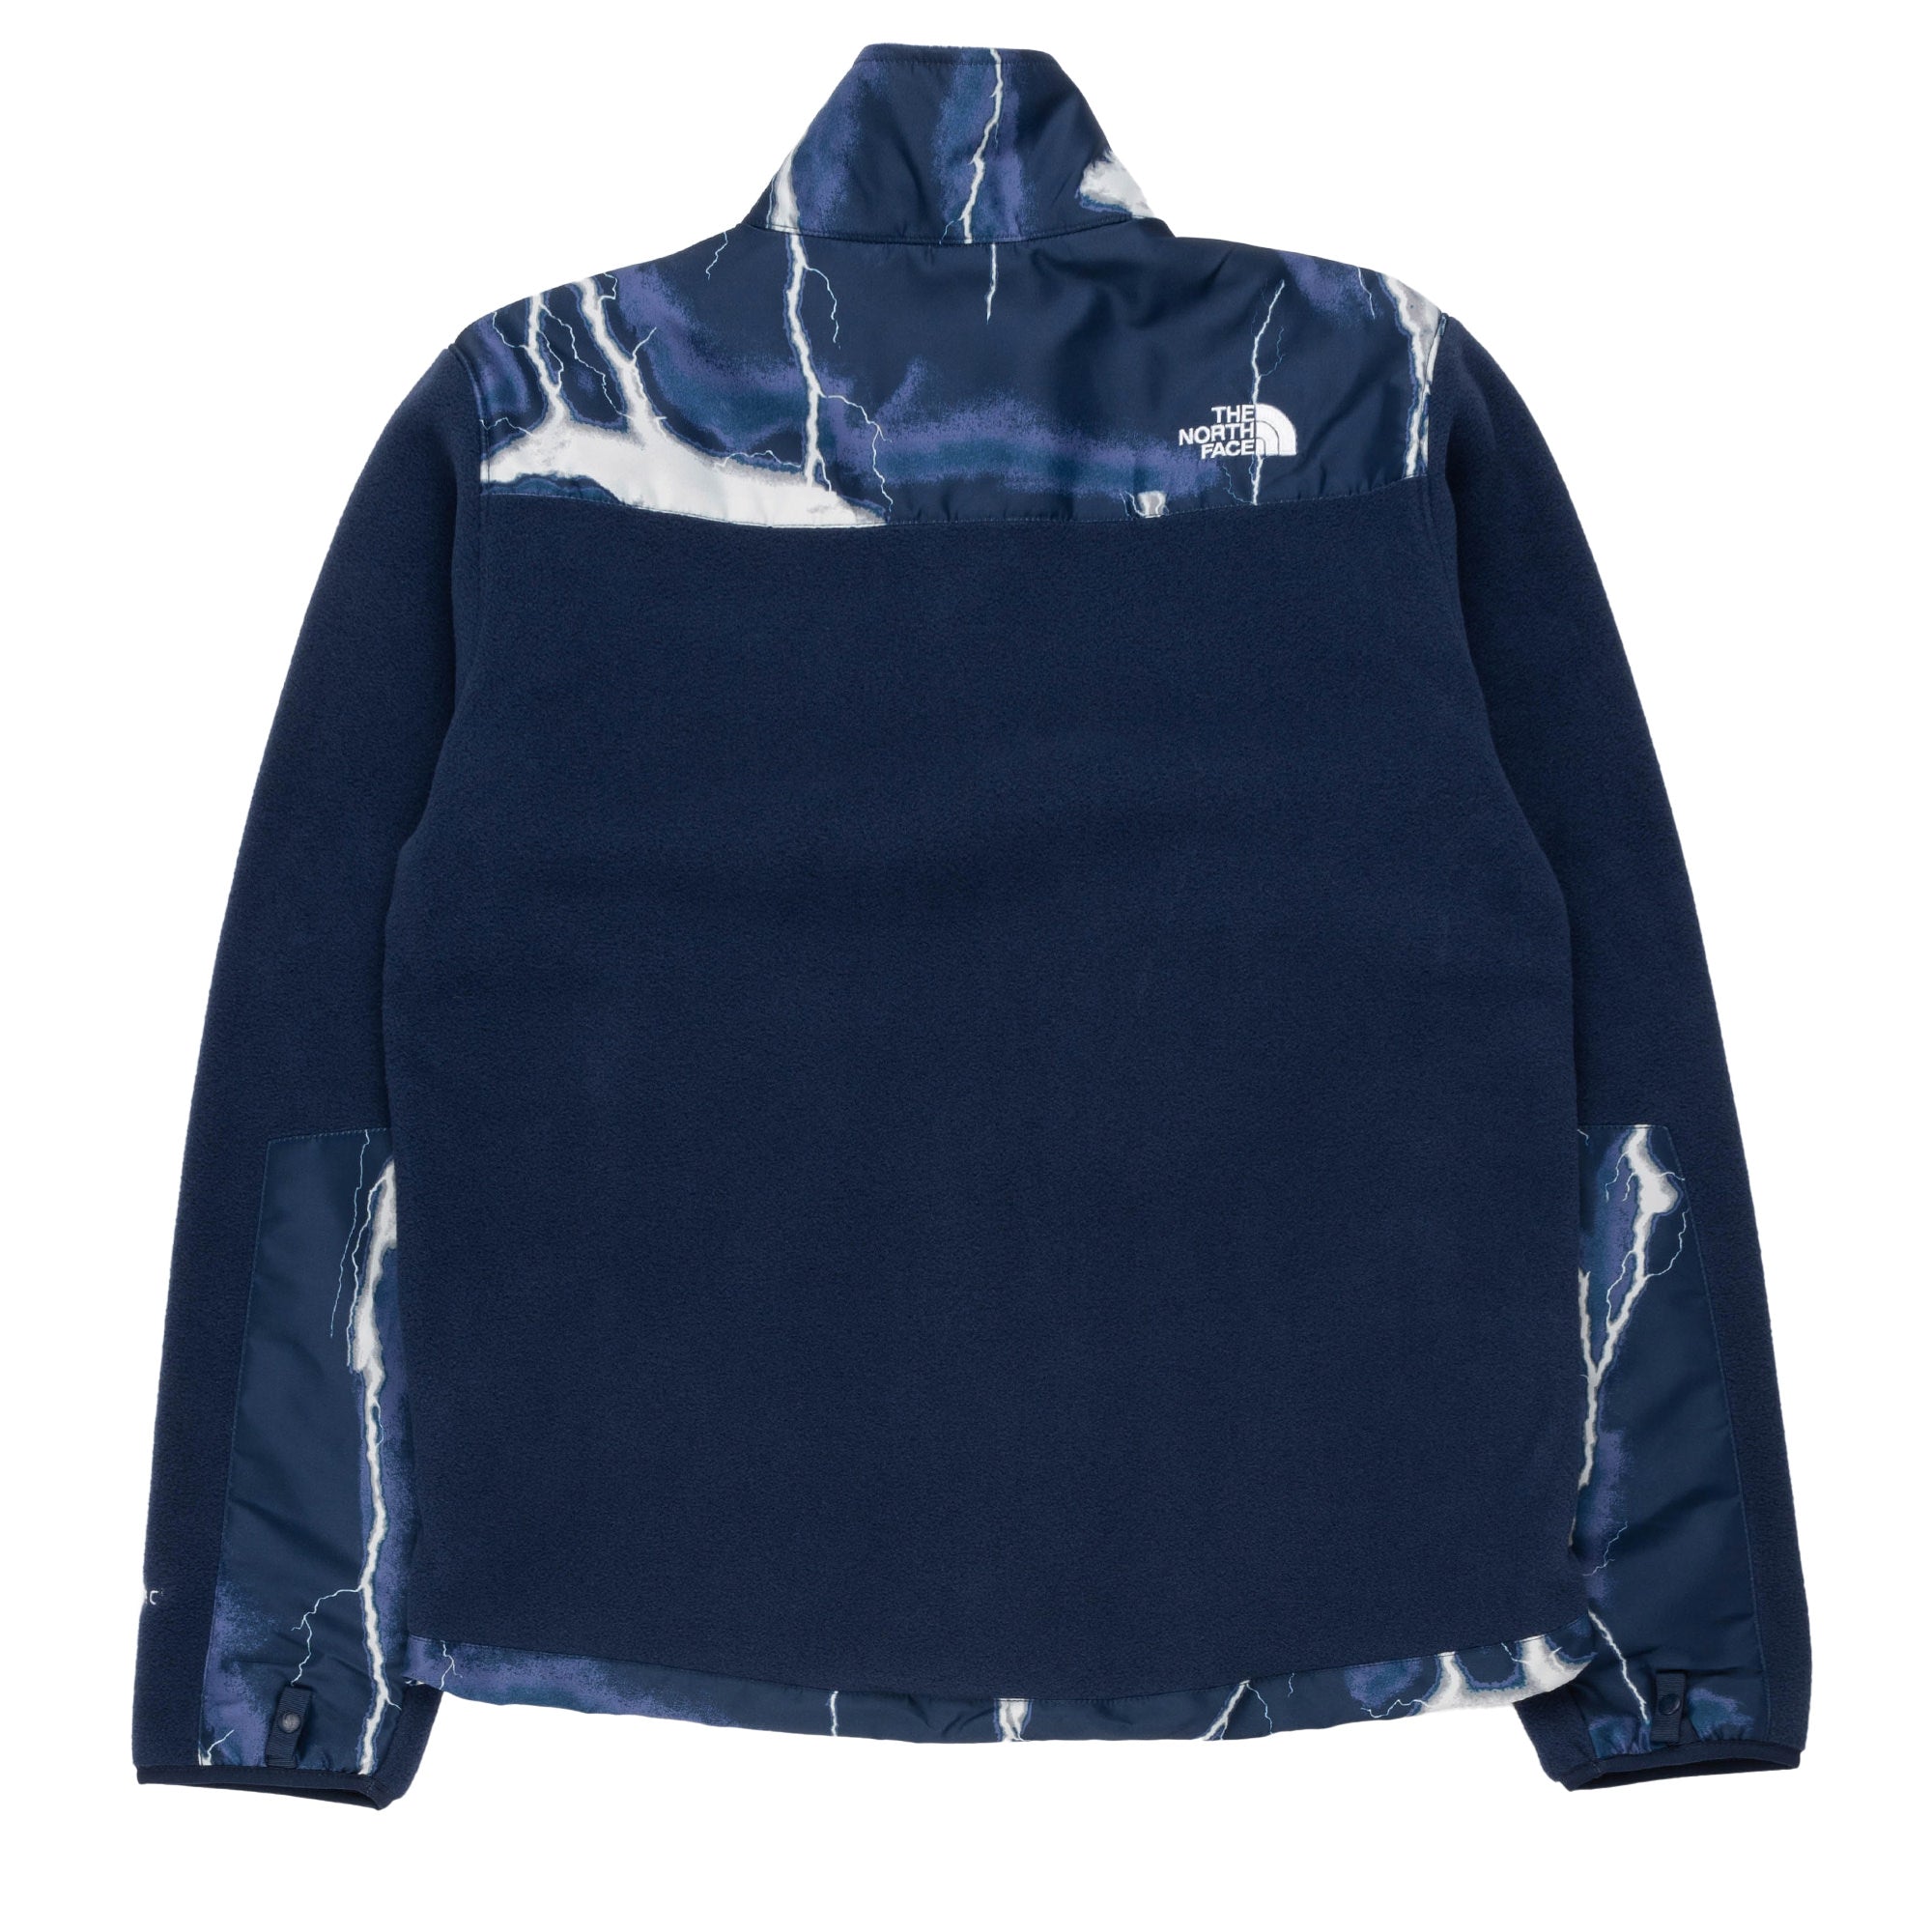 The North Face – Capsule